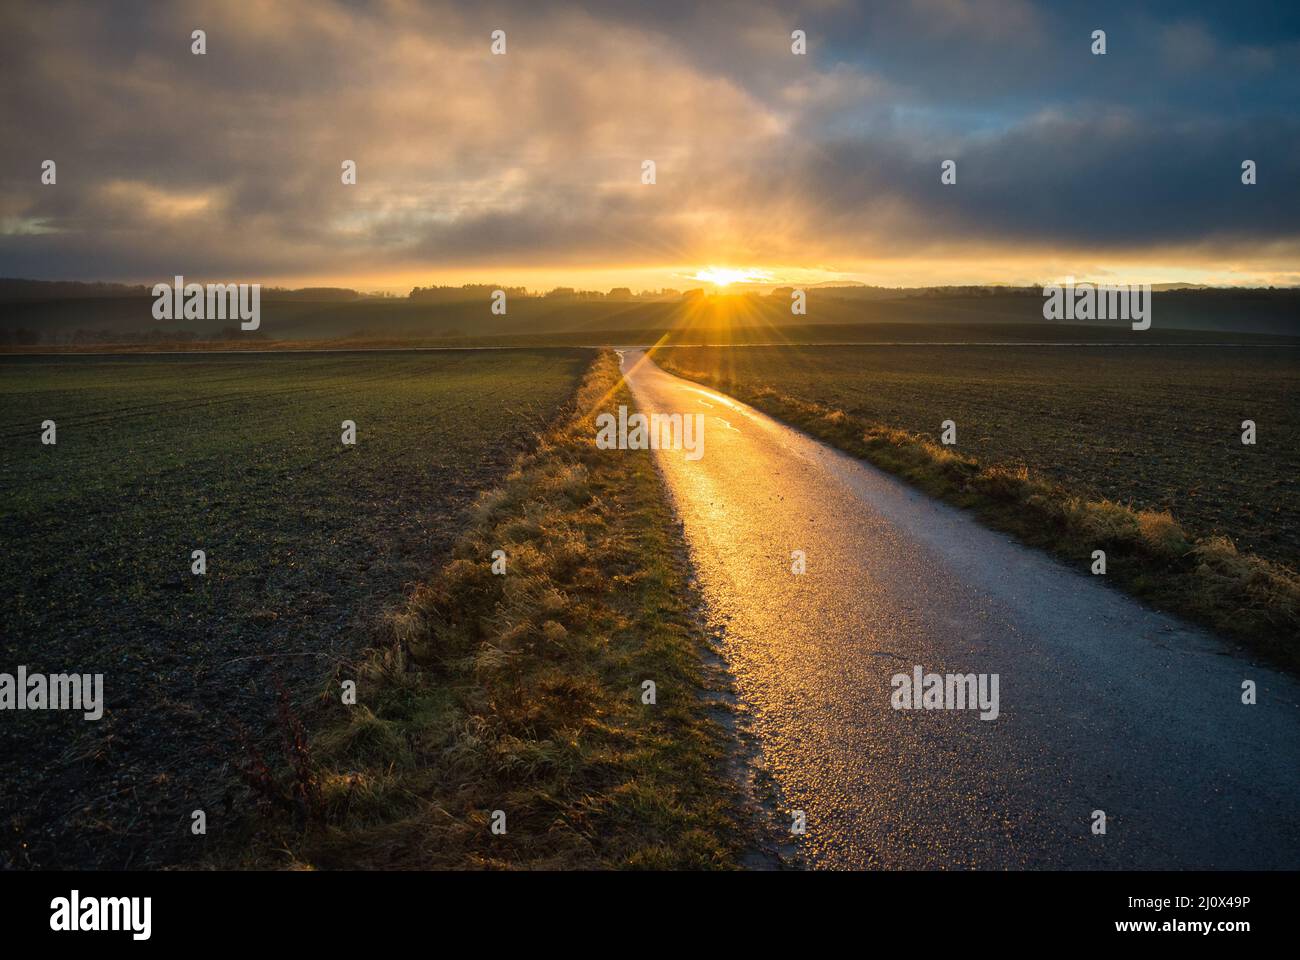 Nice sunset at a view over landscape Stock Photo